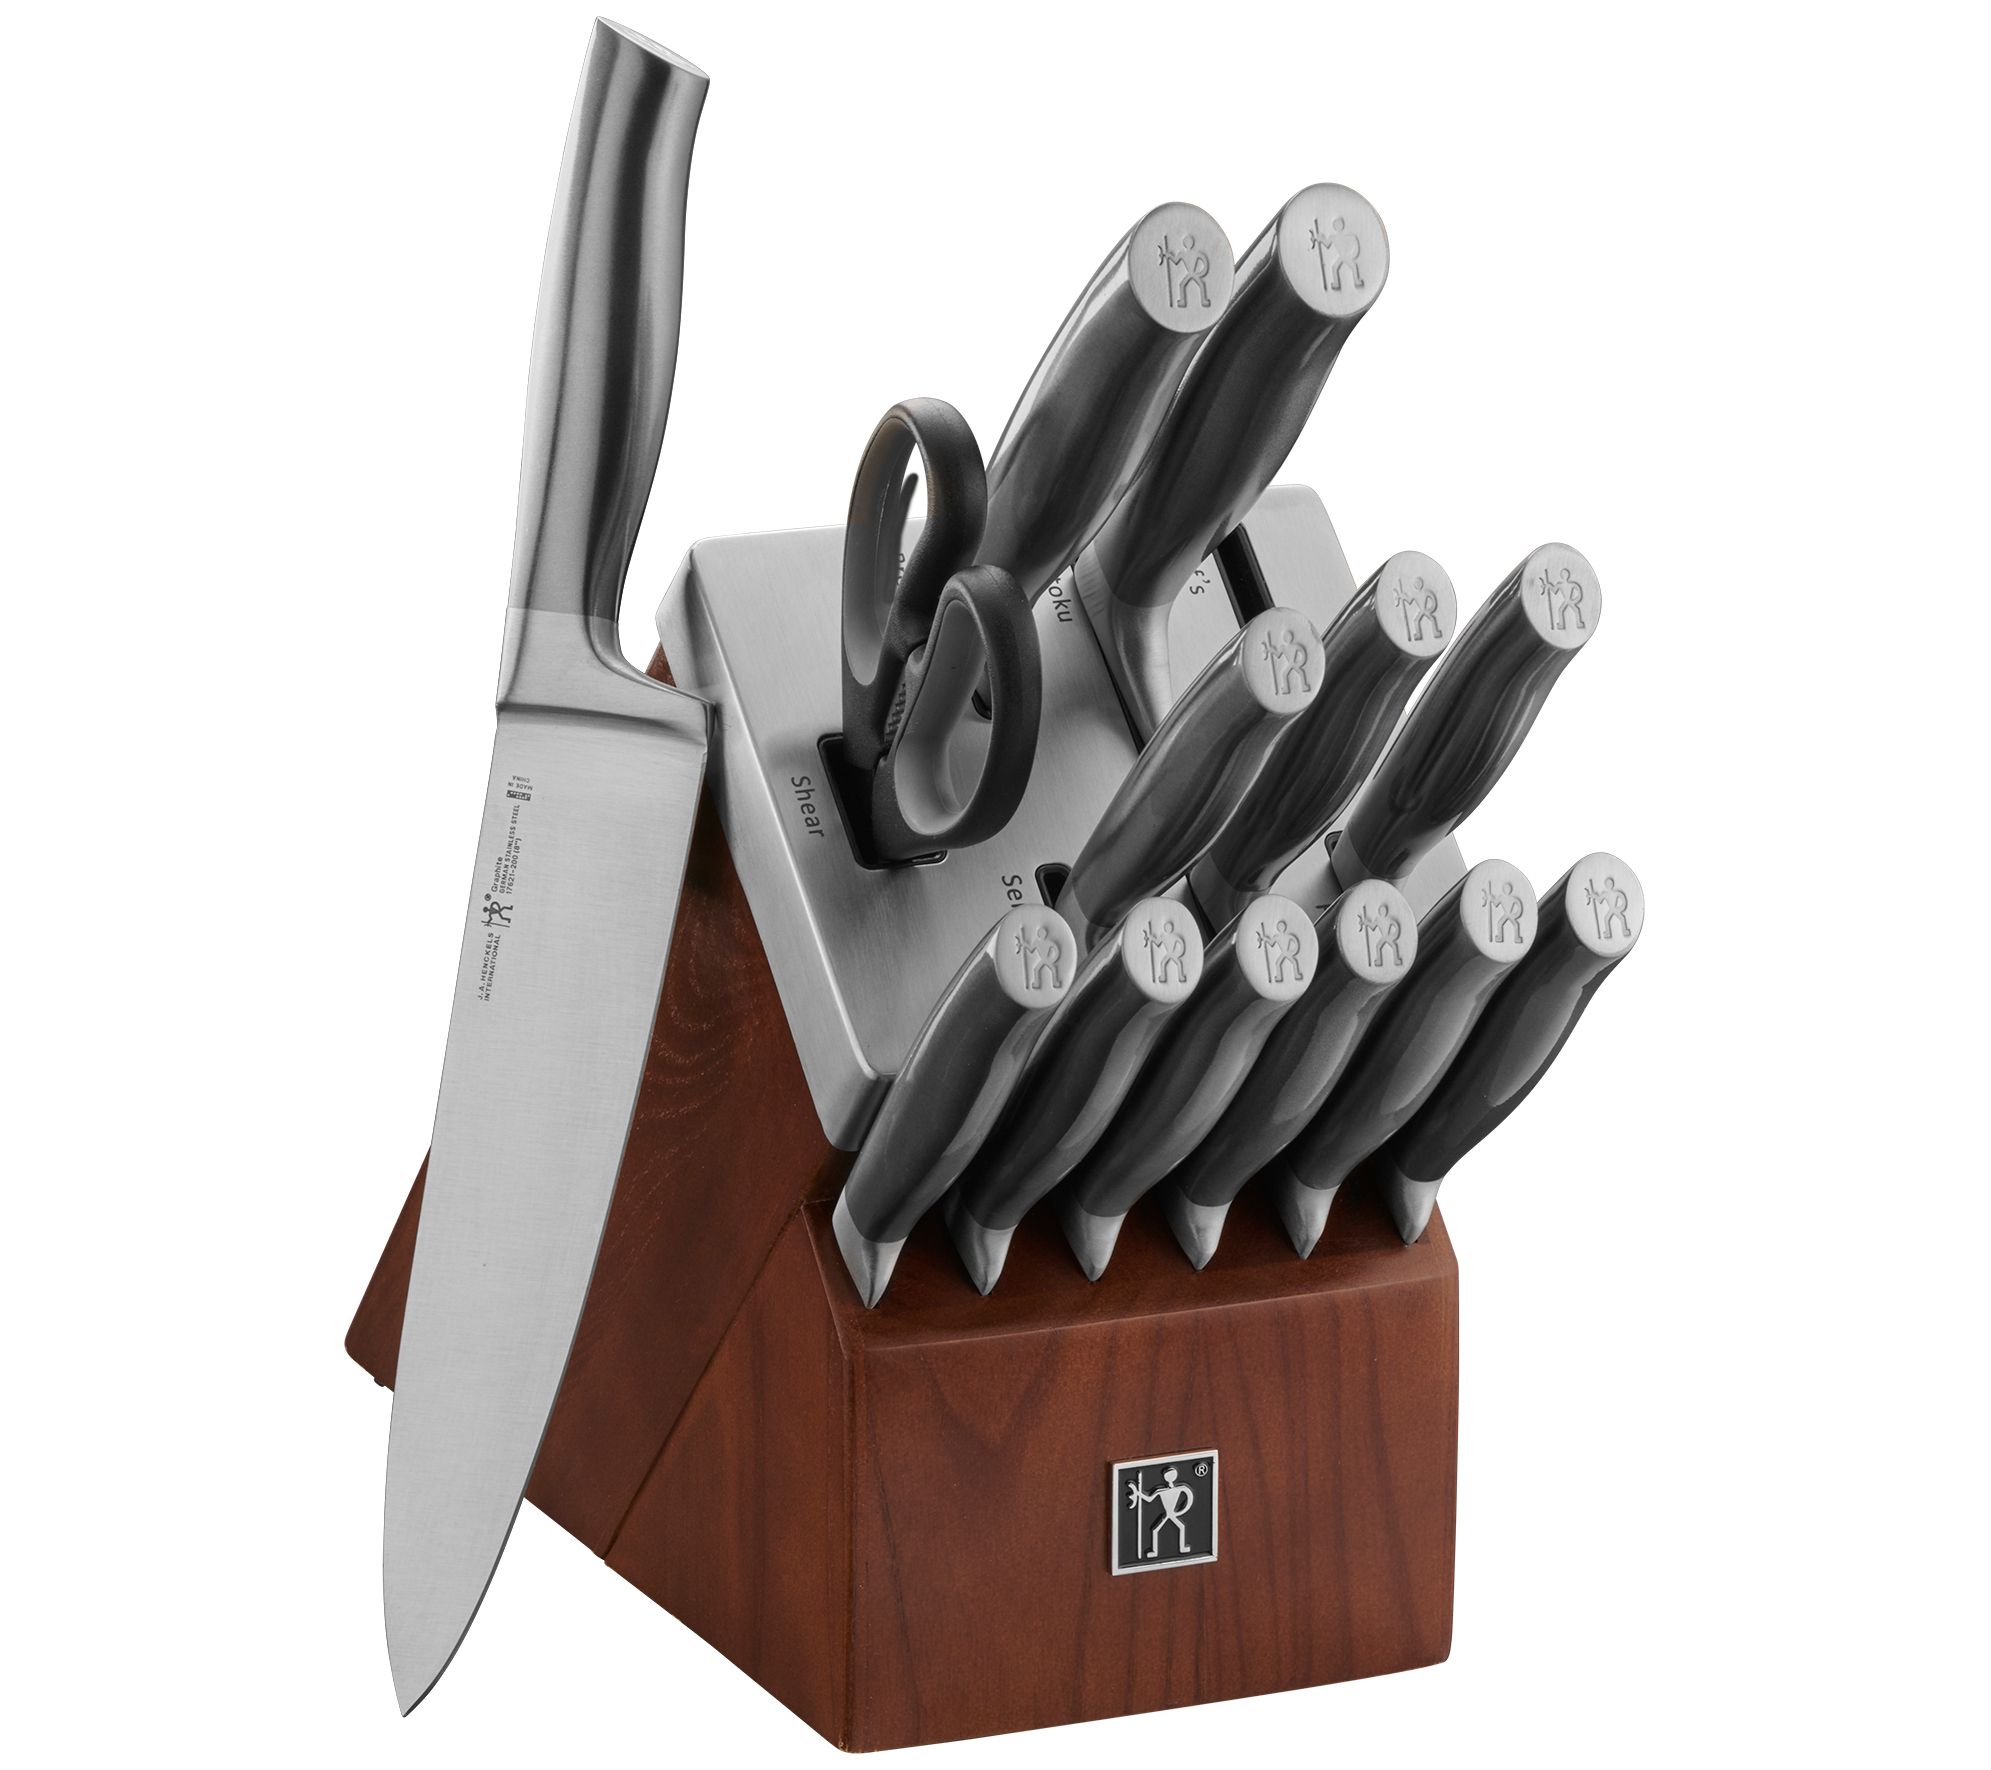 GreenLife Cutlery Stainless Steel Knife Set, 13 Piece with Knife Block,  Turquoise 